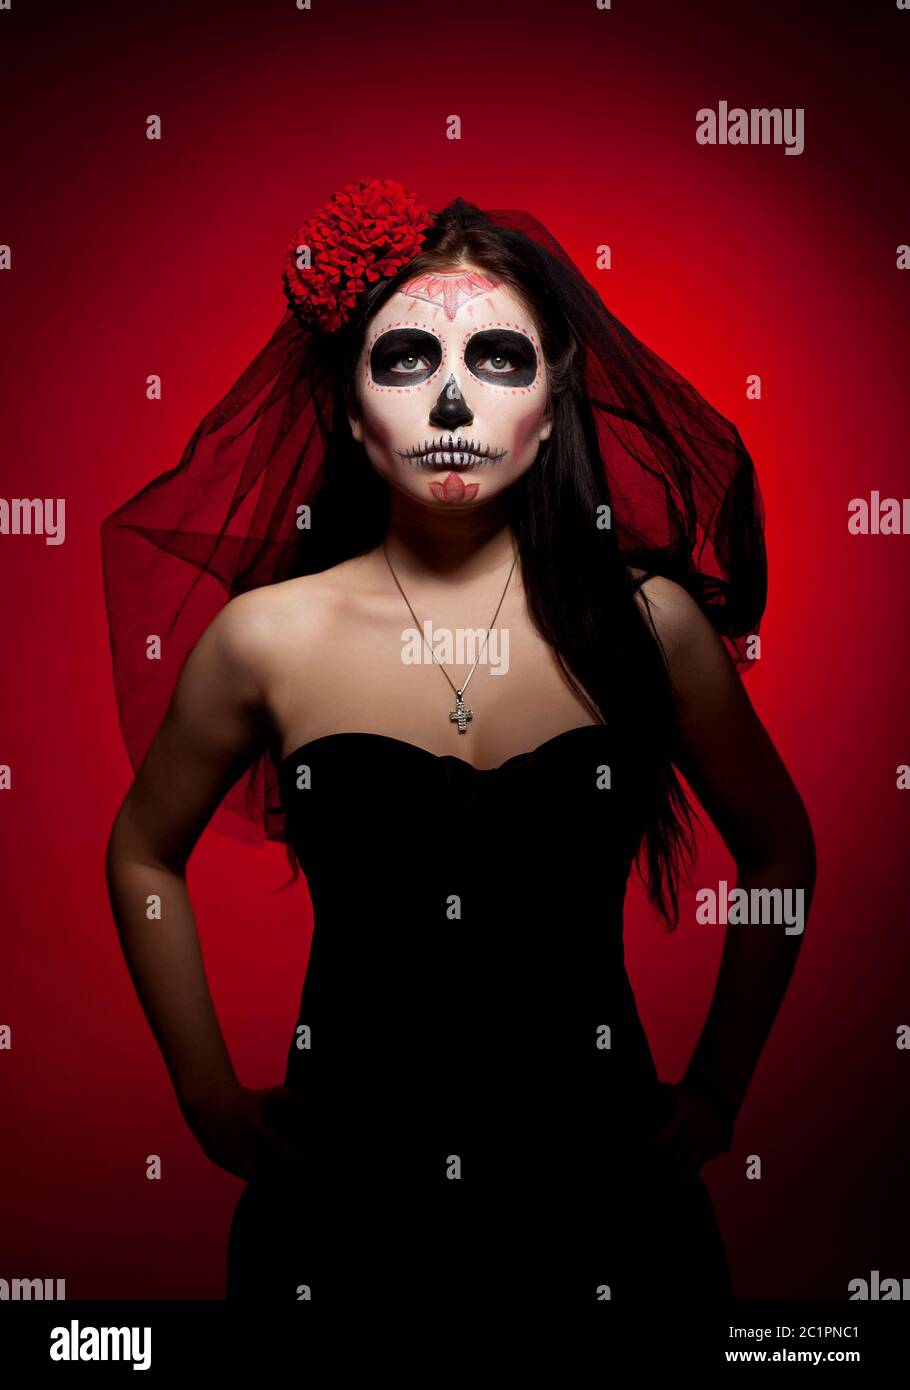 Serious woman in day of the dead mask on red Stock Photo